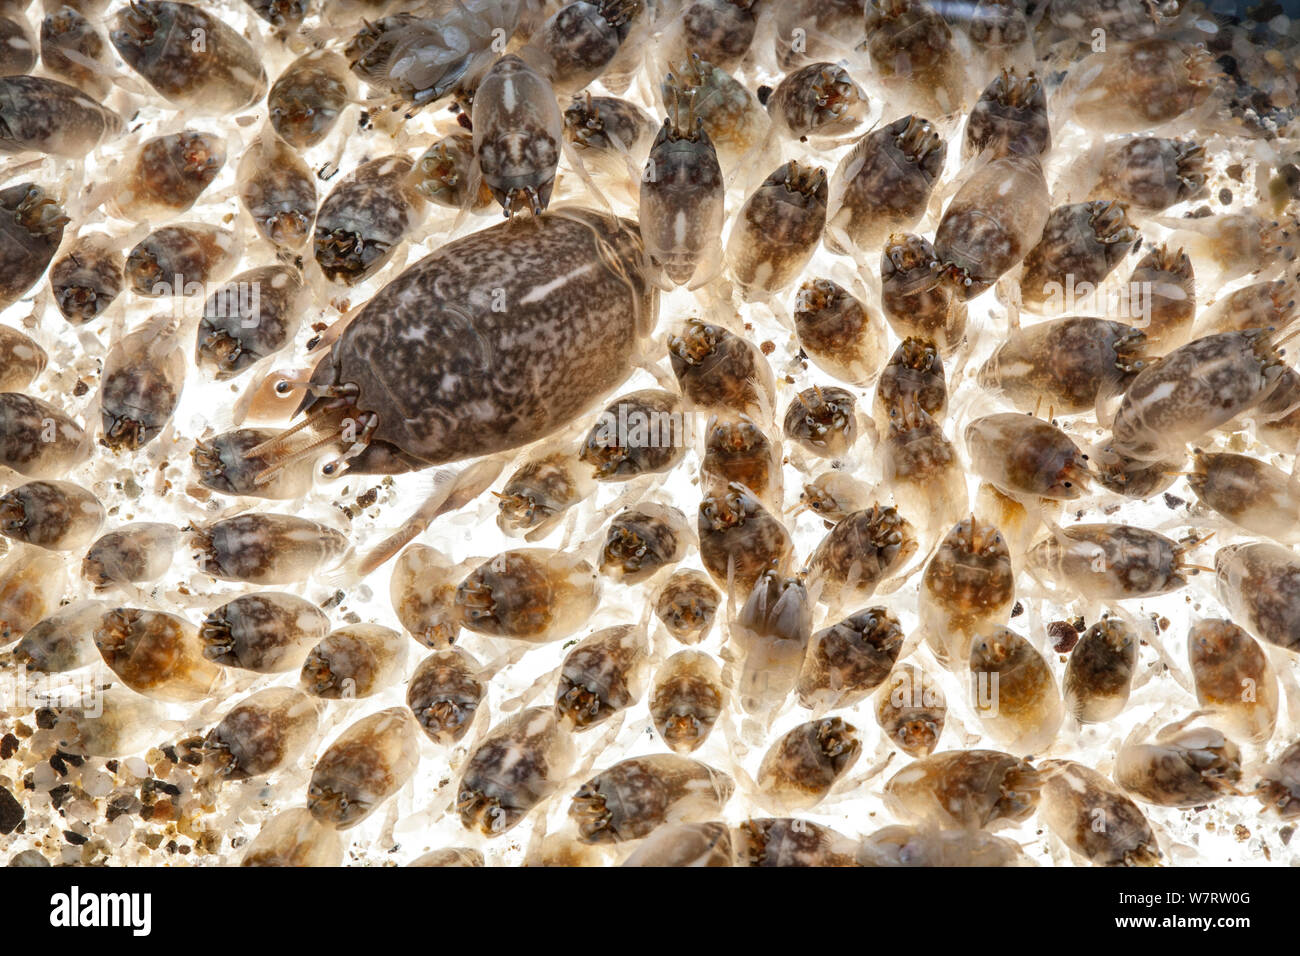 Pacific sand crab adult surrounded by young (Emerita analoga), Malibu, California, USA, May, meetyourneighbours.net project Stock Photo